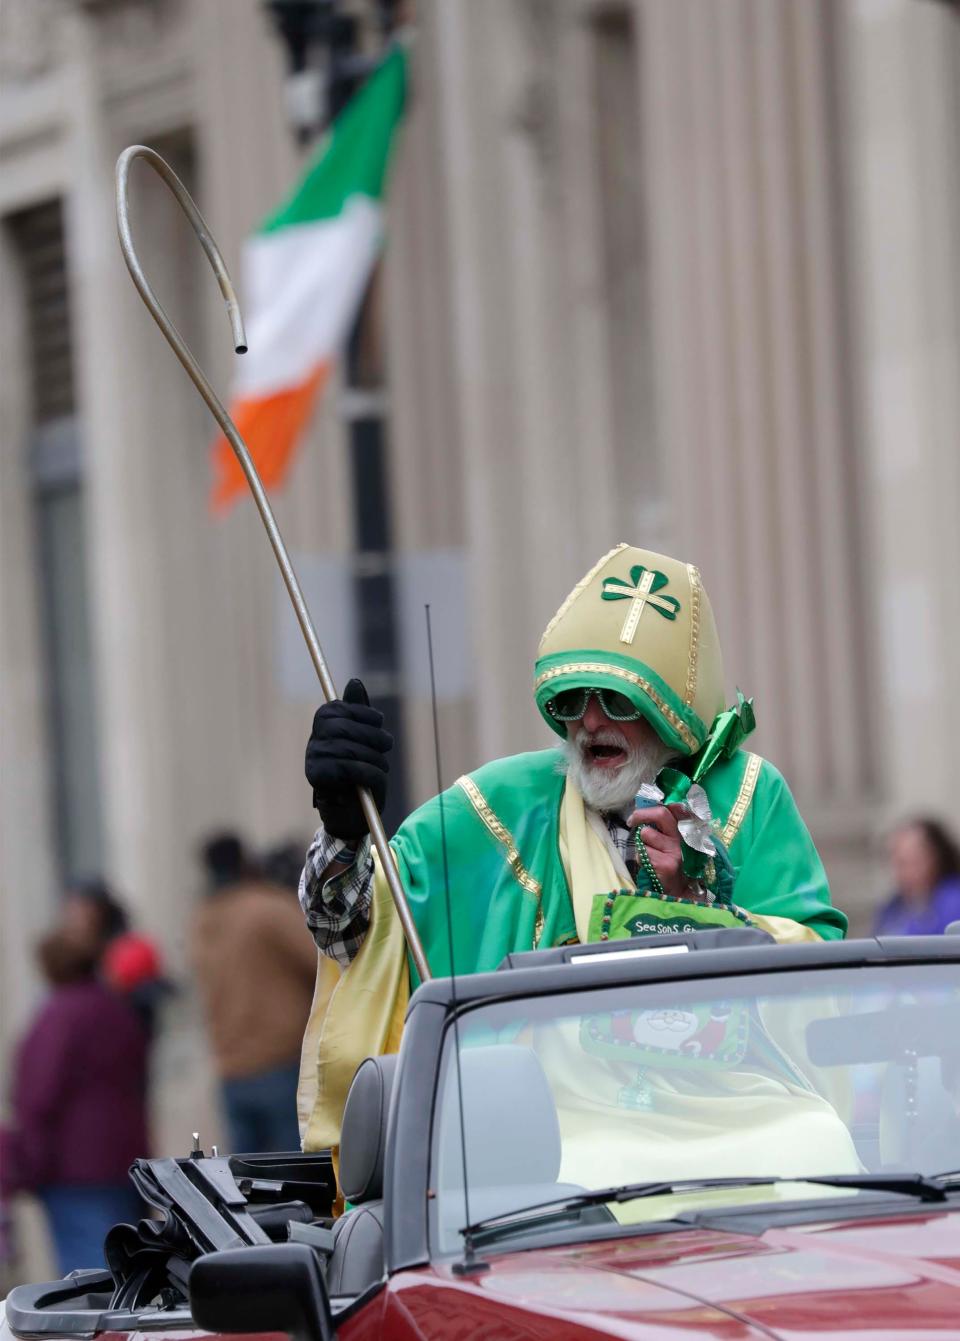 St. Patrick, portrayed by Tom Drill, rides in the St. Patrick's Day parade, Saturday, March 14, 2020, in Manitowoc, Wis.